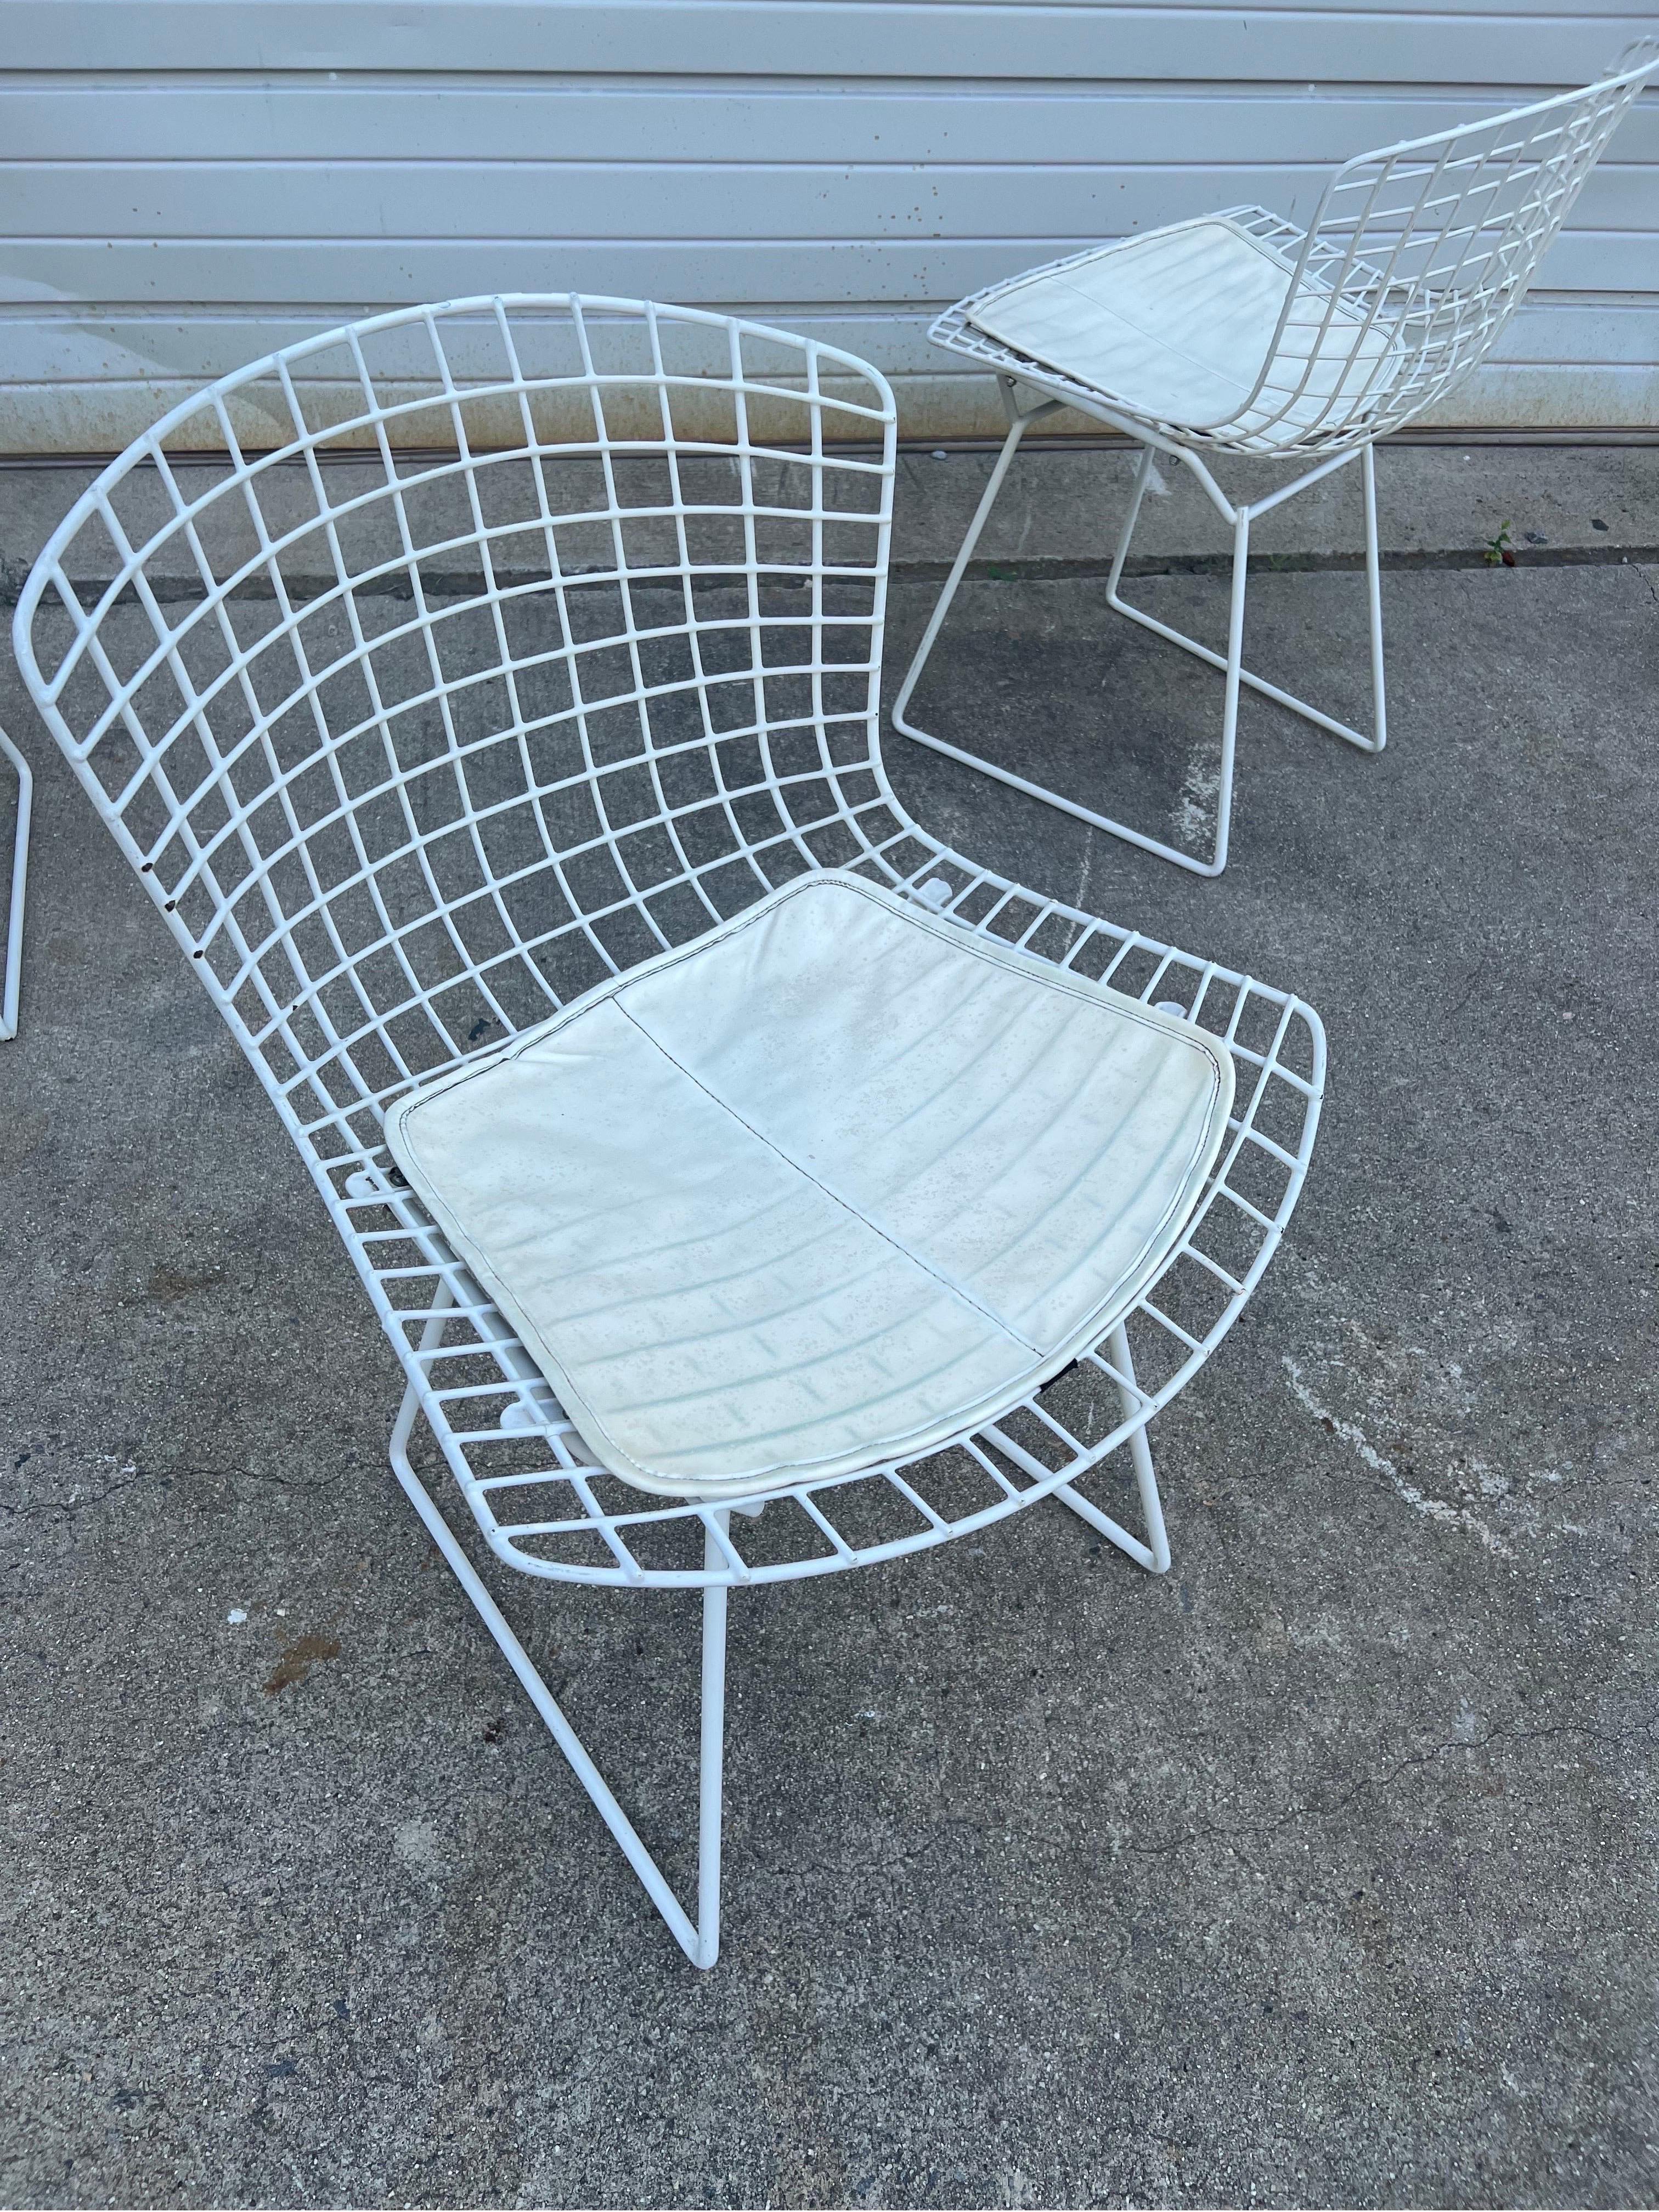 American '4' Chairs by Harry Bertoia for Knoll Manufacturing, Circa 1960s